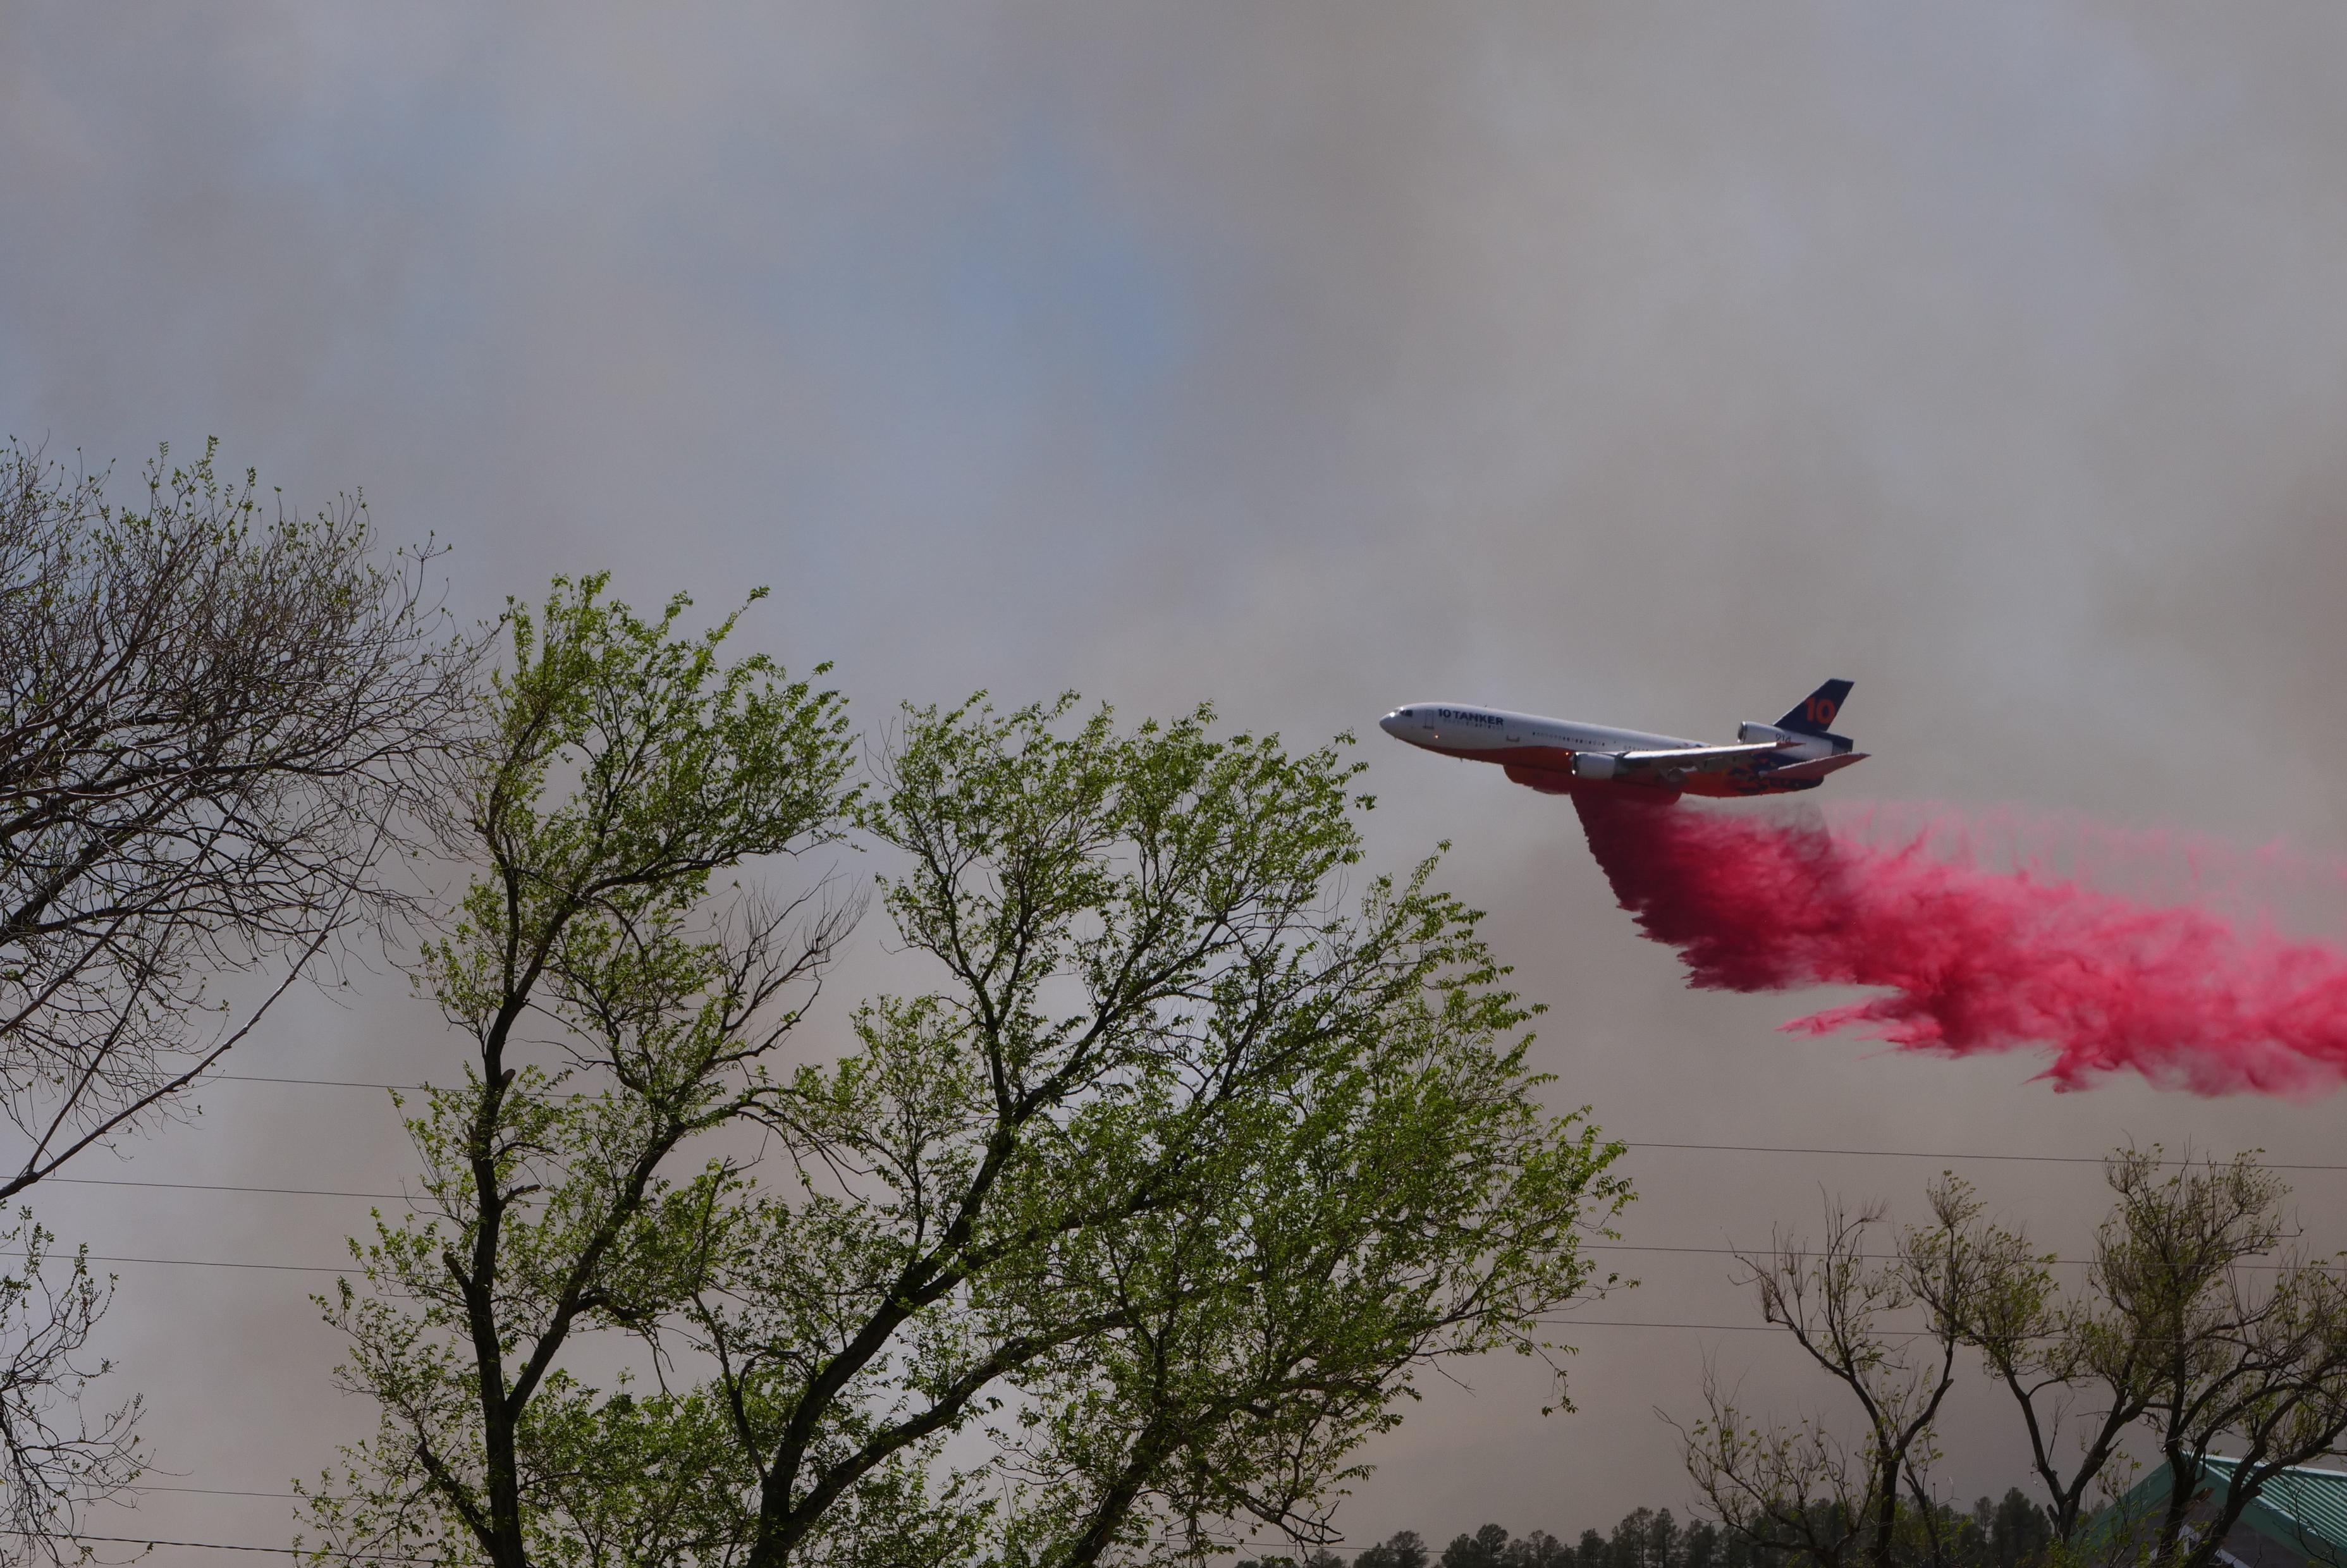 A large aircraft is shown releasing red colored fire retardant. Trees are visible in the foreground.